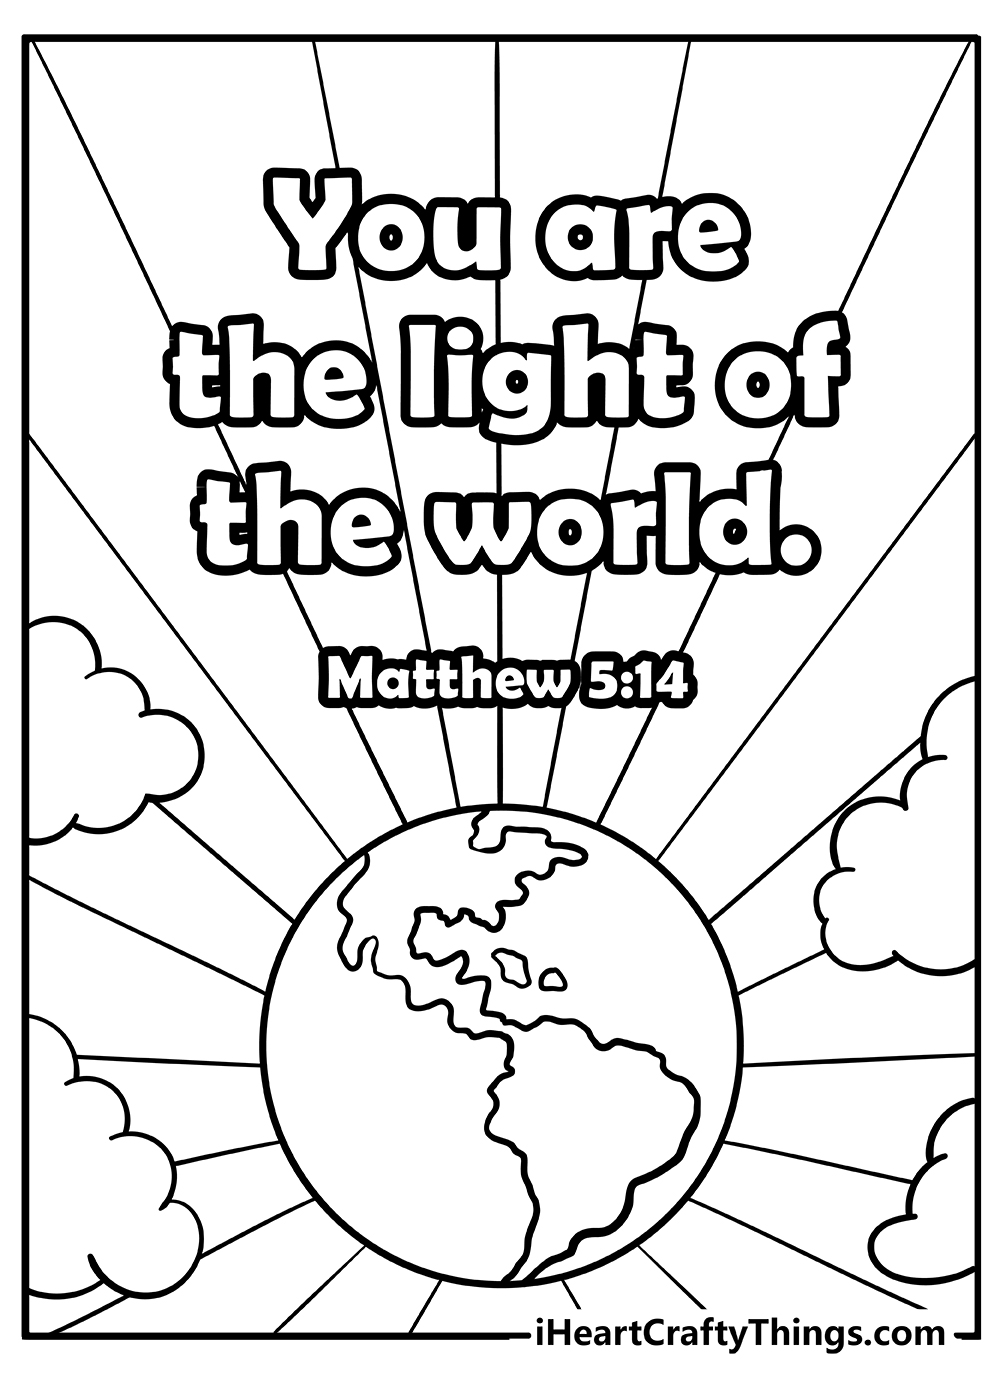 Free Printable Bible Verse Coloring Sheets Simple Mom Project Bible Verse Coloring Page 5 